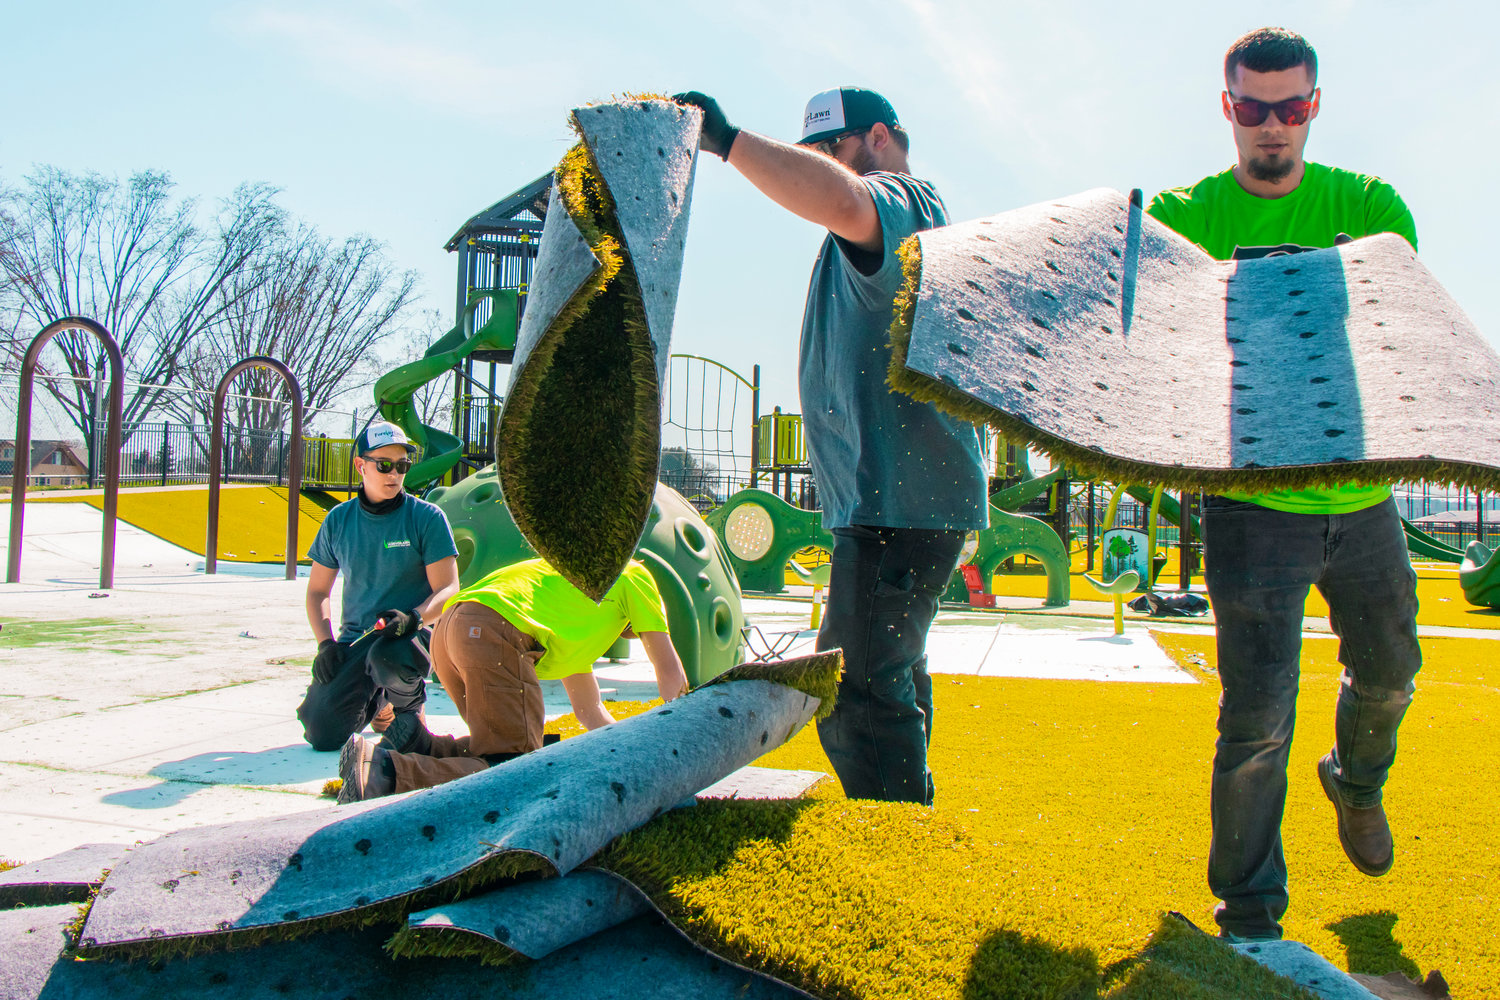 Crews with ForeverLawn mention being ‘bummed’ while working to replace damaged turf within Penny Playground in Chehalis on Friday.